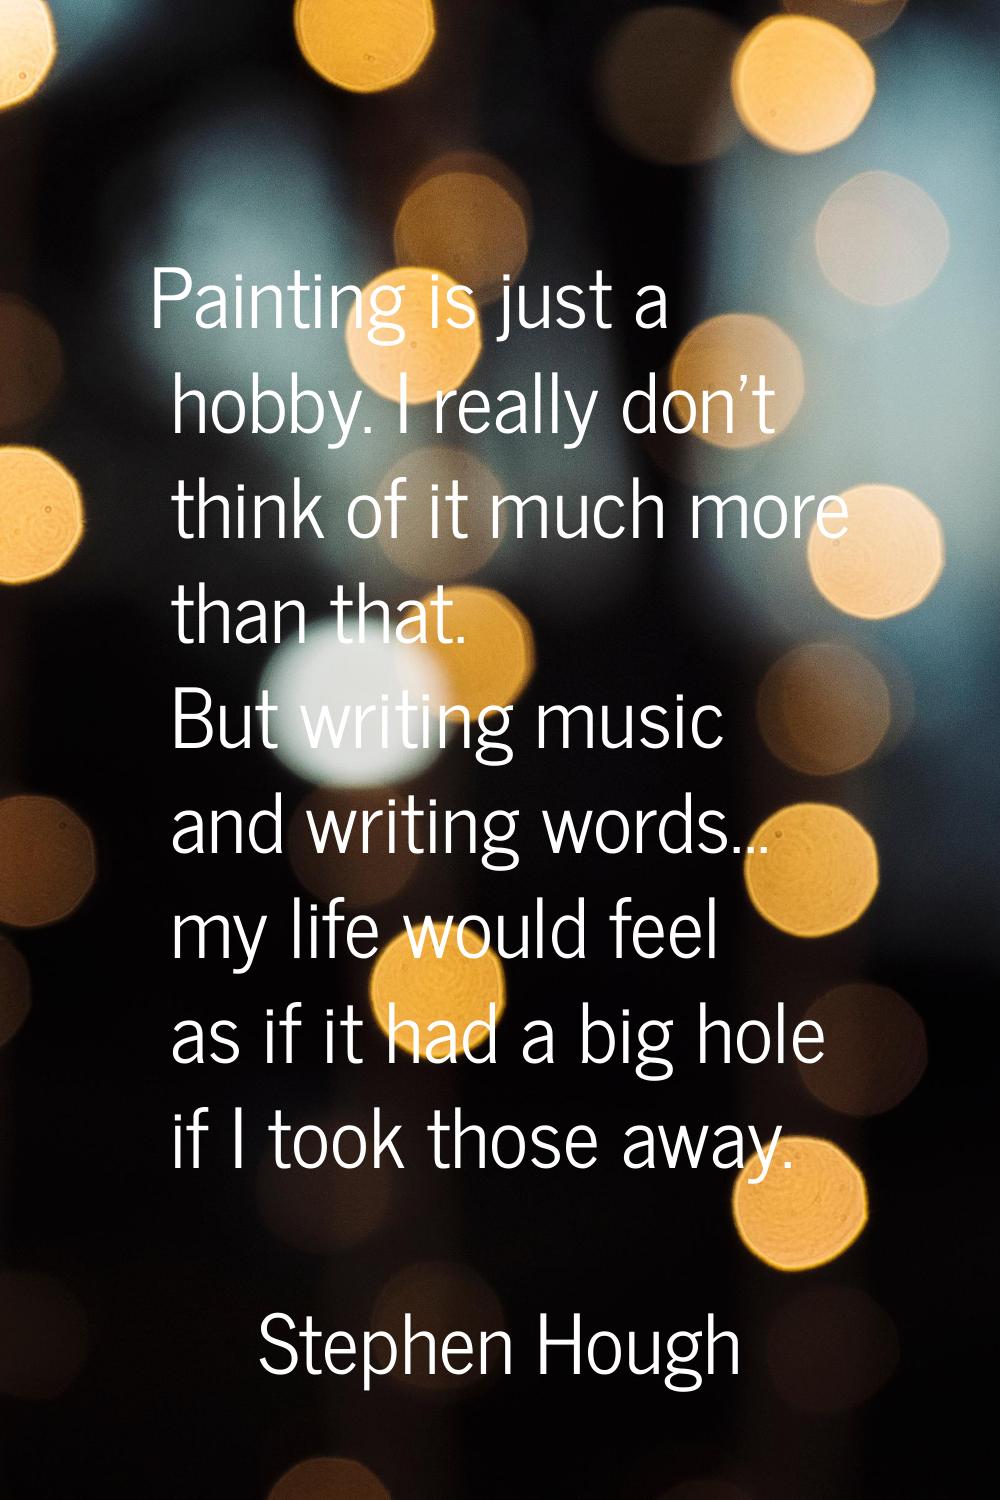 Painting is just a hobby. I really don't think of it much more than that. But writing music and wri